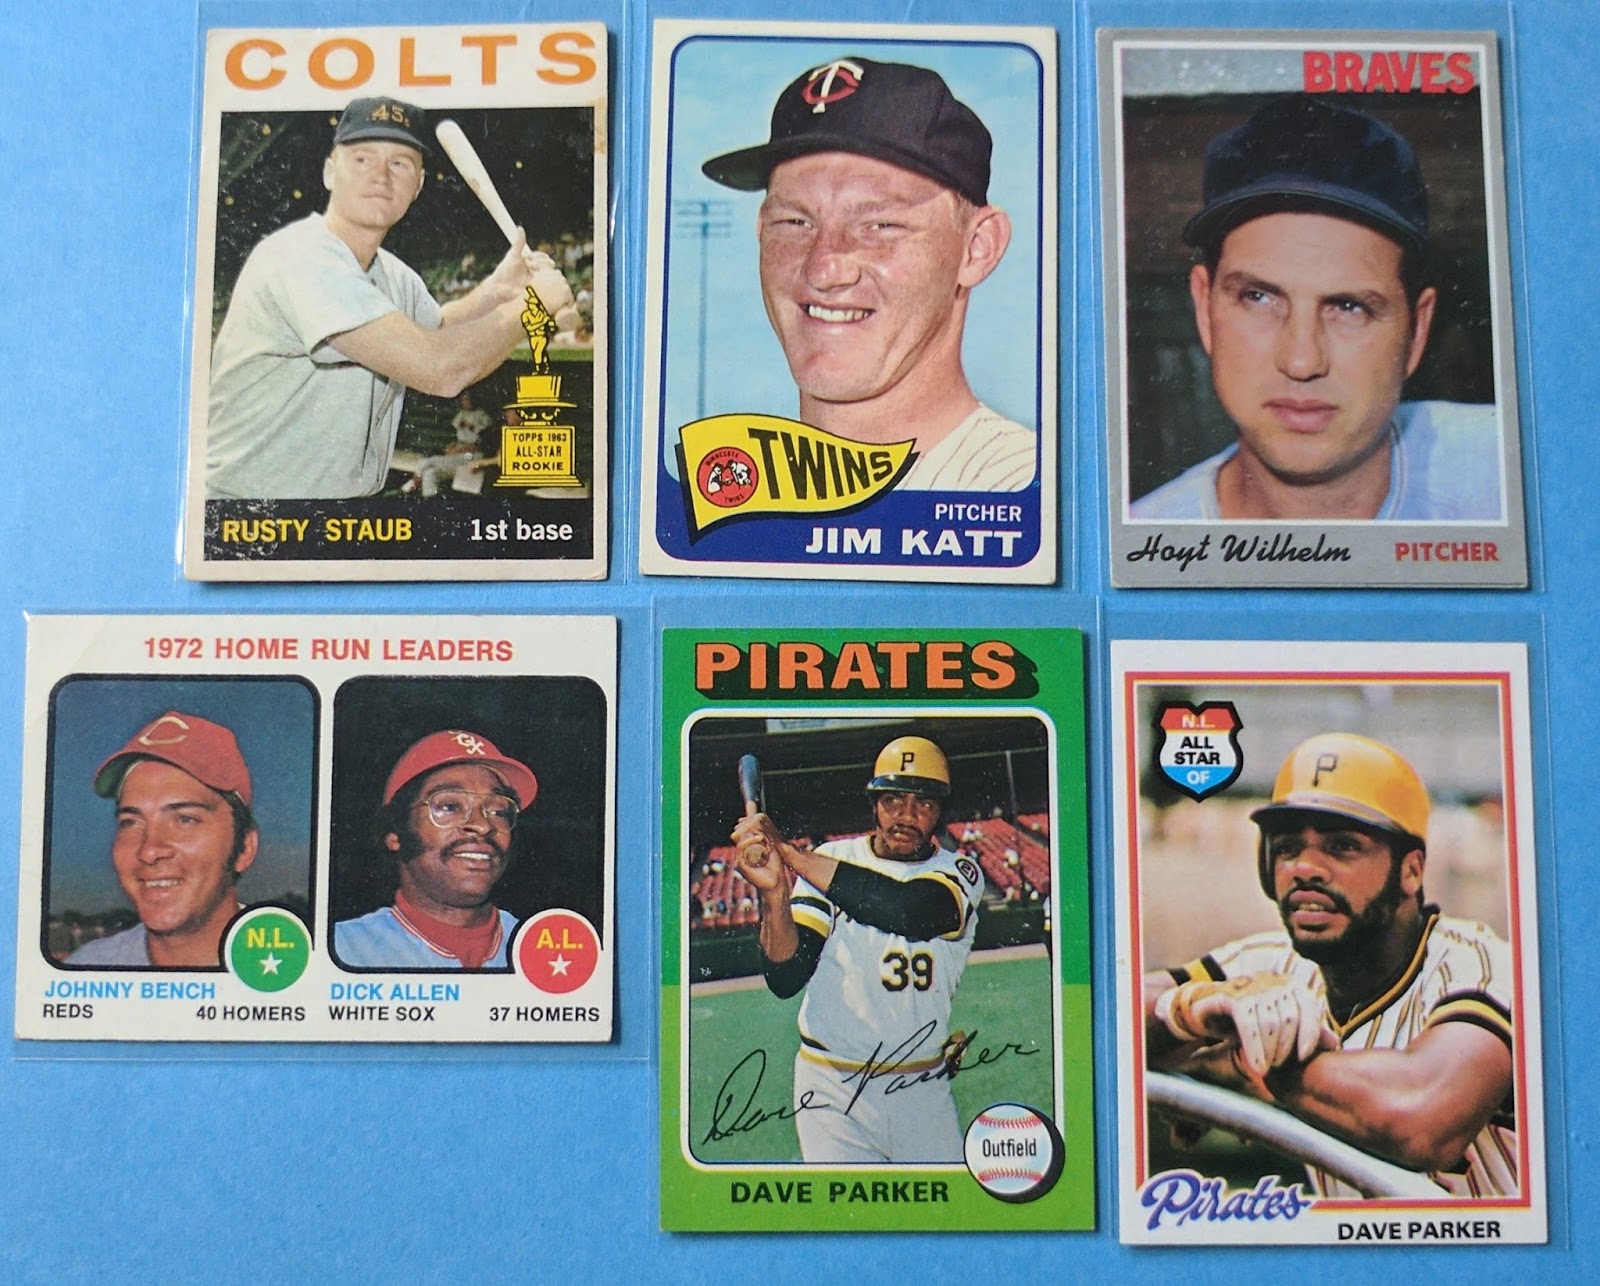 Baseball Card Breakdown: Trade roundup featuring a Whole Lotta Molly